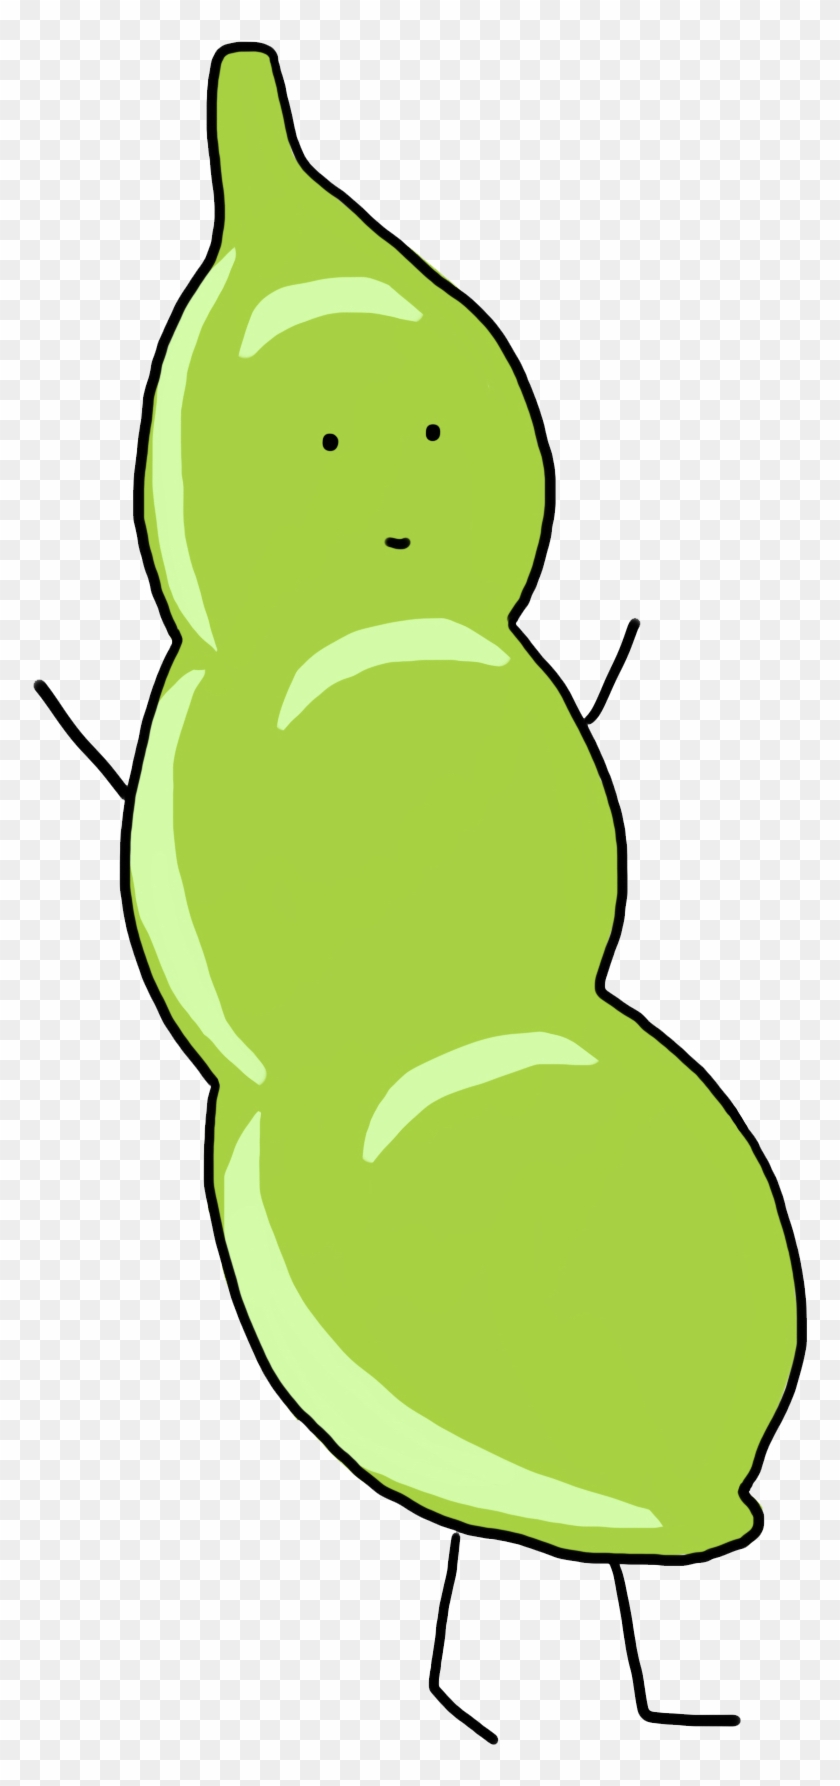 Peas Drawing Cute Clipart Free Download - Png Download #2426262